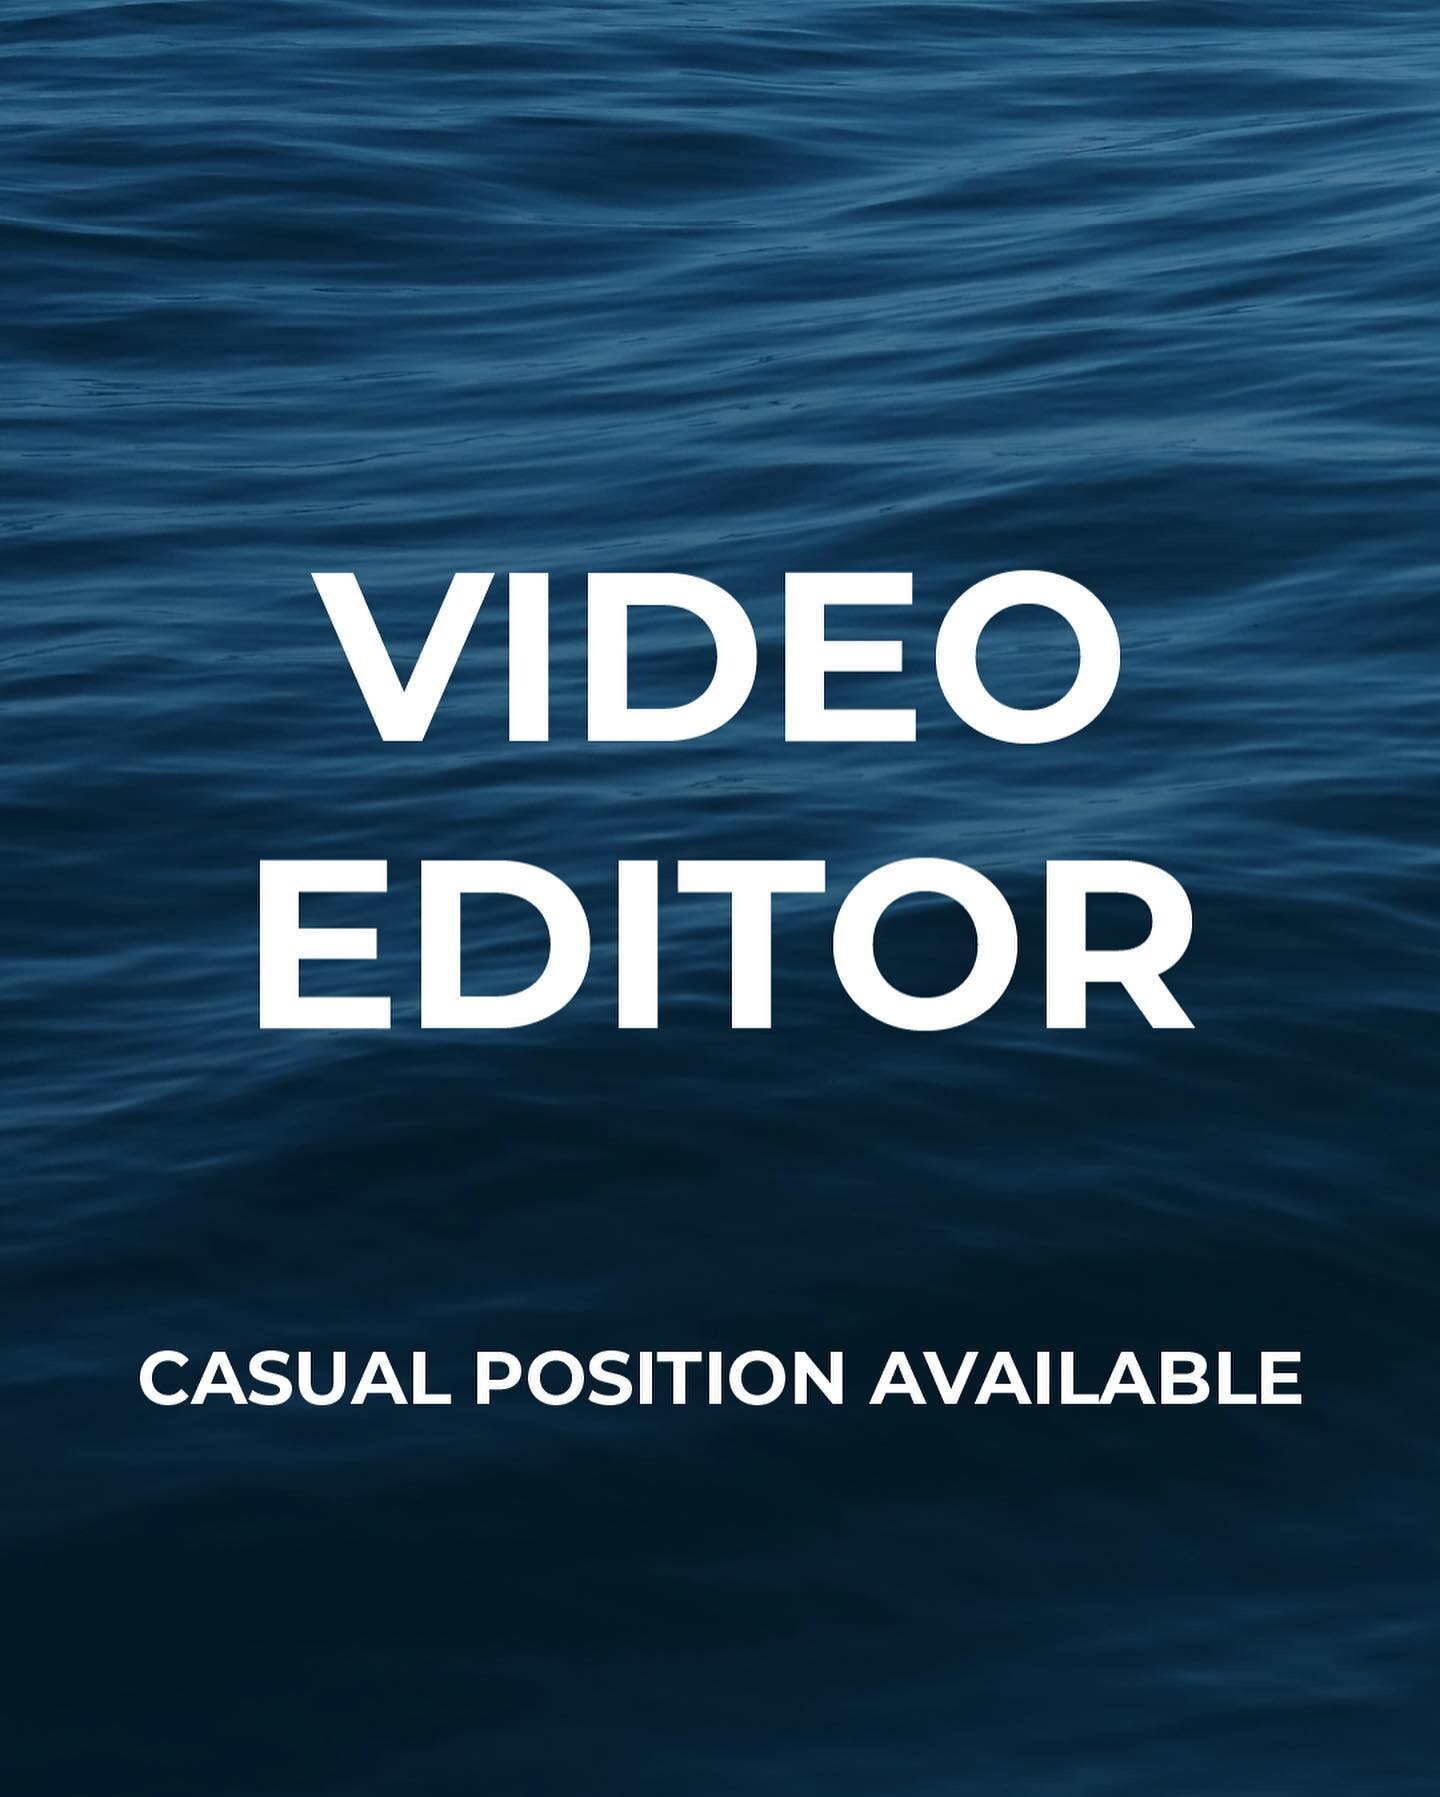 We are currently looking for a Video Editor to join the Fluid Imagery team! If you are interested, email info@fluidimagery.com.au or send us a dm.